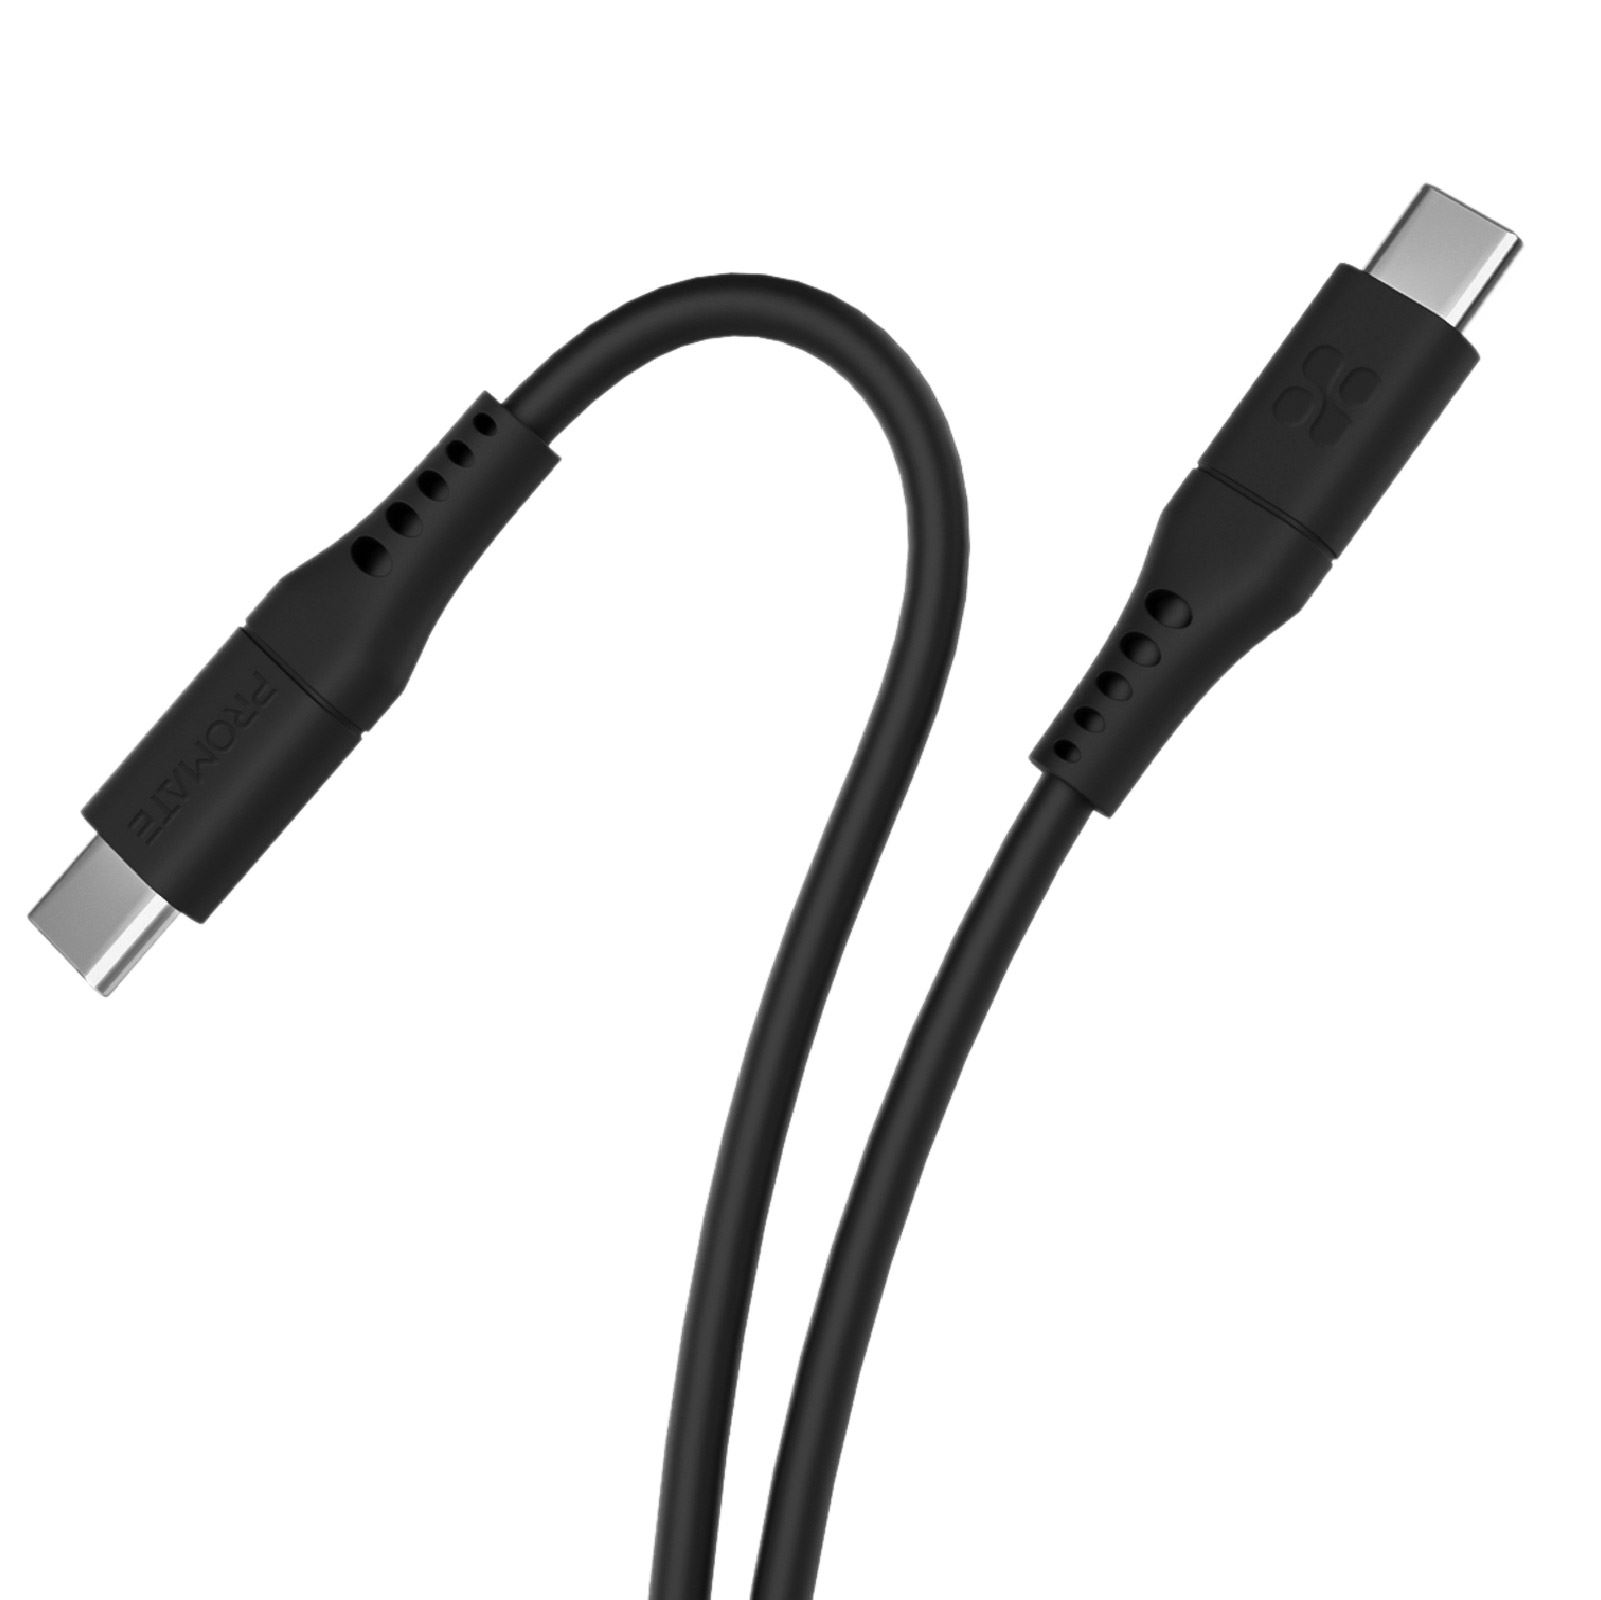 USB C TO USB C 60W POWER DELIVERY AND DATA CABLE 2M